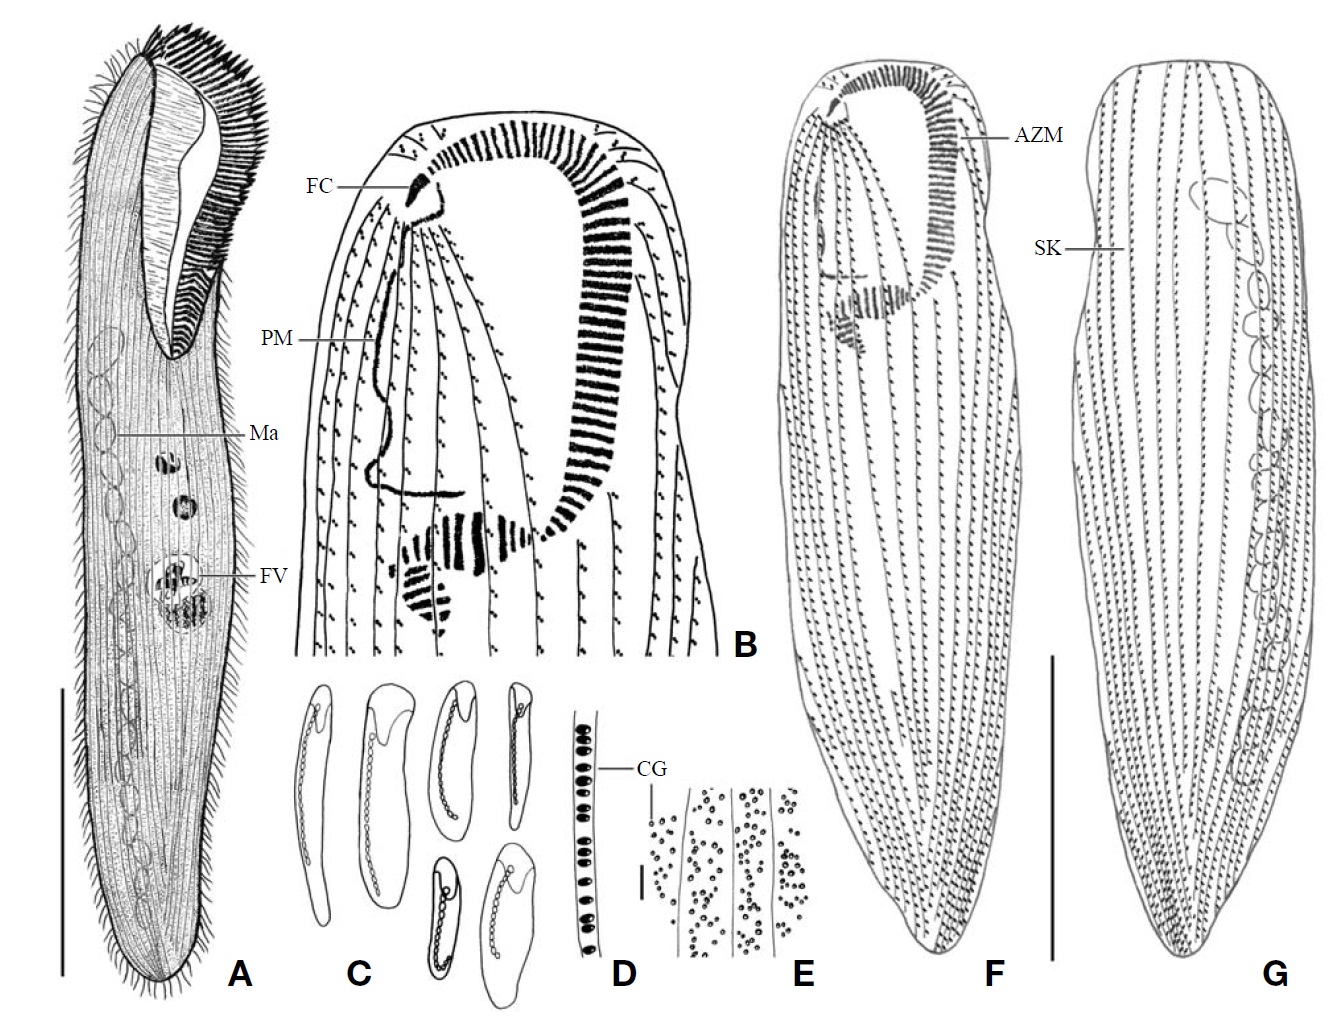 Morphology and infraciliature of Condylostoma minutum from live specimens (A, C-E) and after protargol impregnation (B, F, G). A, Ventral view of a typical individual; B, Ventral view of buccal field; C, The various body shape and macronuclear nodules pattern; D, Lateral view of cortical granules; E, Ventral view of cortical granules; F, Ventral view of impregnated specimen; G, Dorsal view of impregnated specimen. AZM, adoral zone of membranelles; CG, cortical granule; FC, frontal cirrus; FV, food vacuole; Ma, macronucleus; PM, paroral membrane; SK, somatic kineties. Scale bars: A, G=100 μm, E=5 μm.